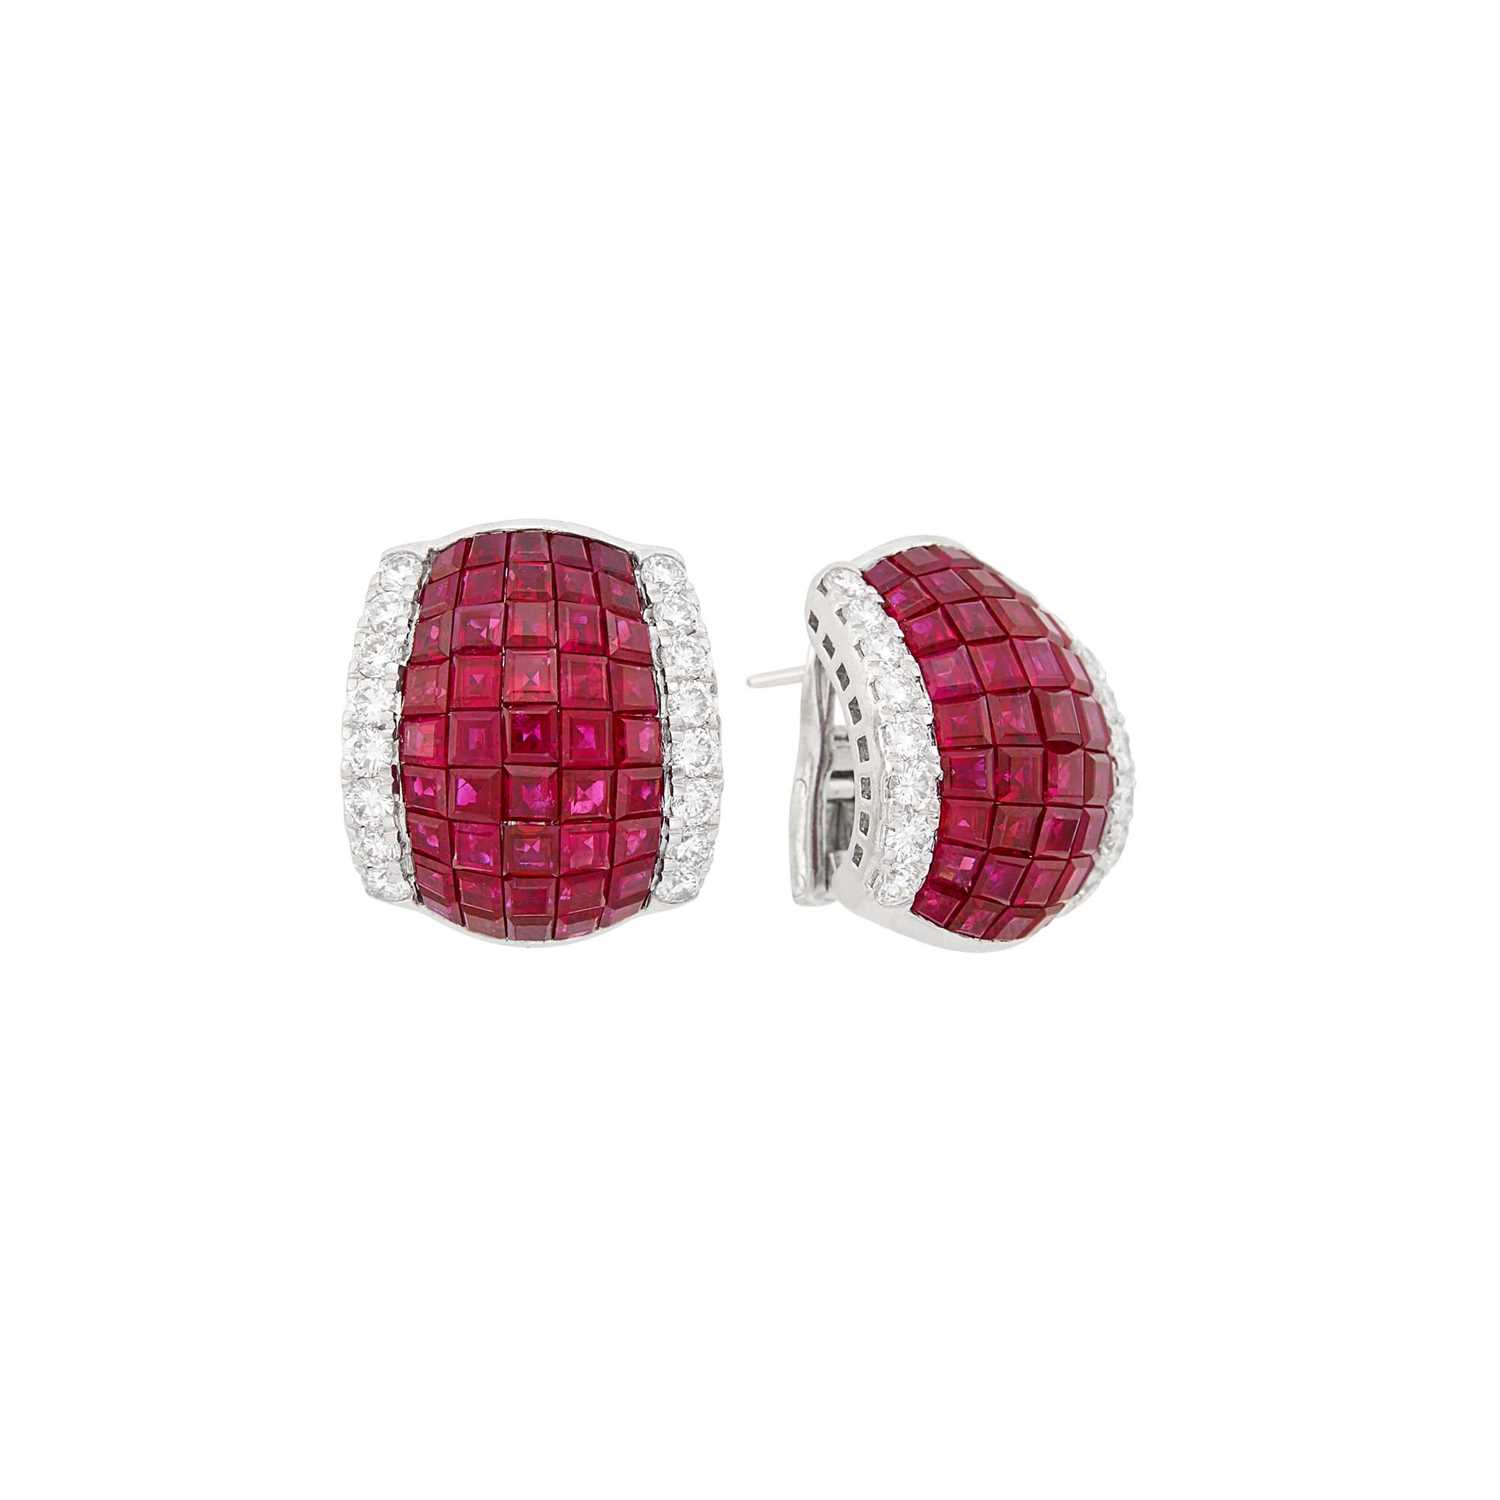 Lot 106 - Pair of Platinum, Invisibly-Set Ruby and Diamond Earclips